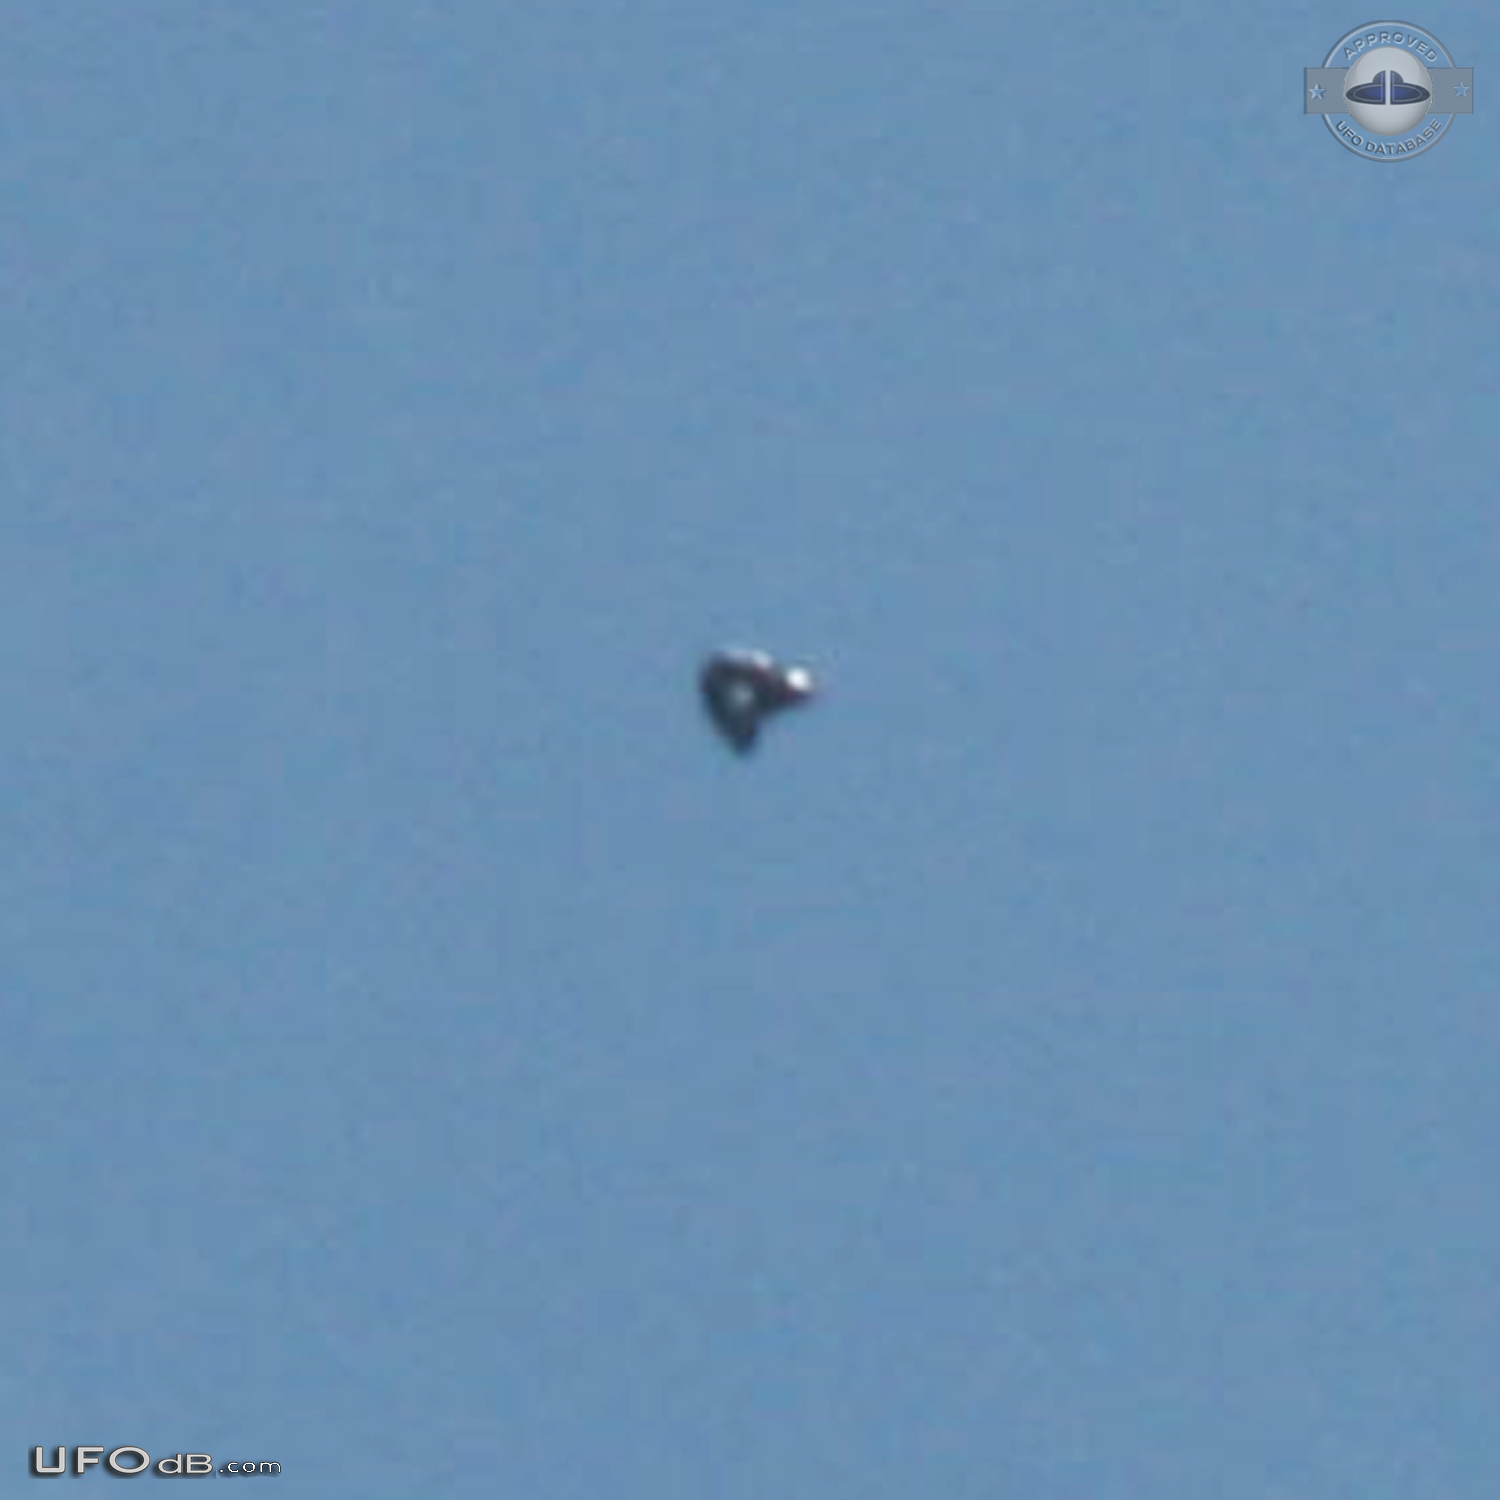 Watched UFO first in the west move quickly through to north east - Gle UFO Picture #740-6